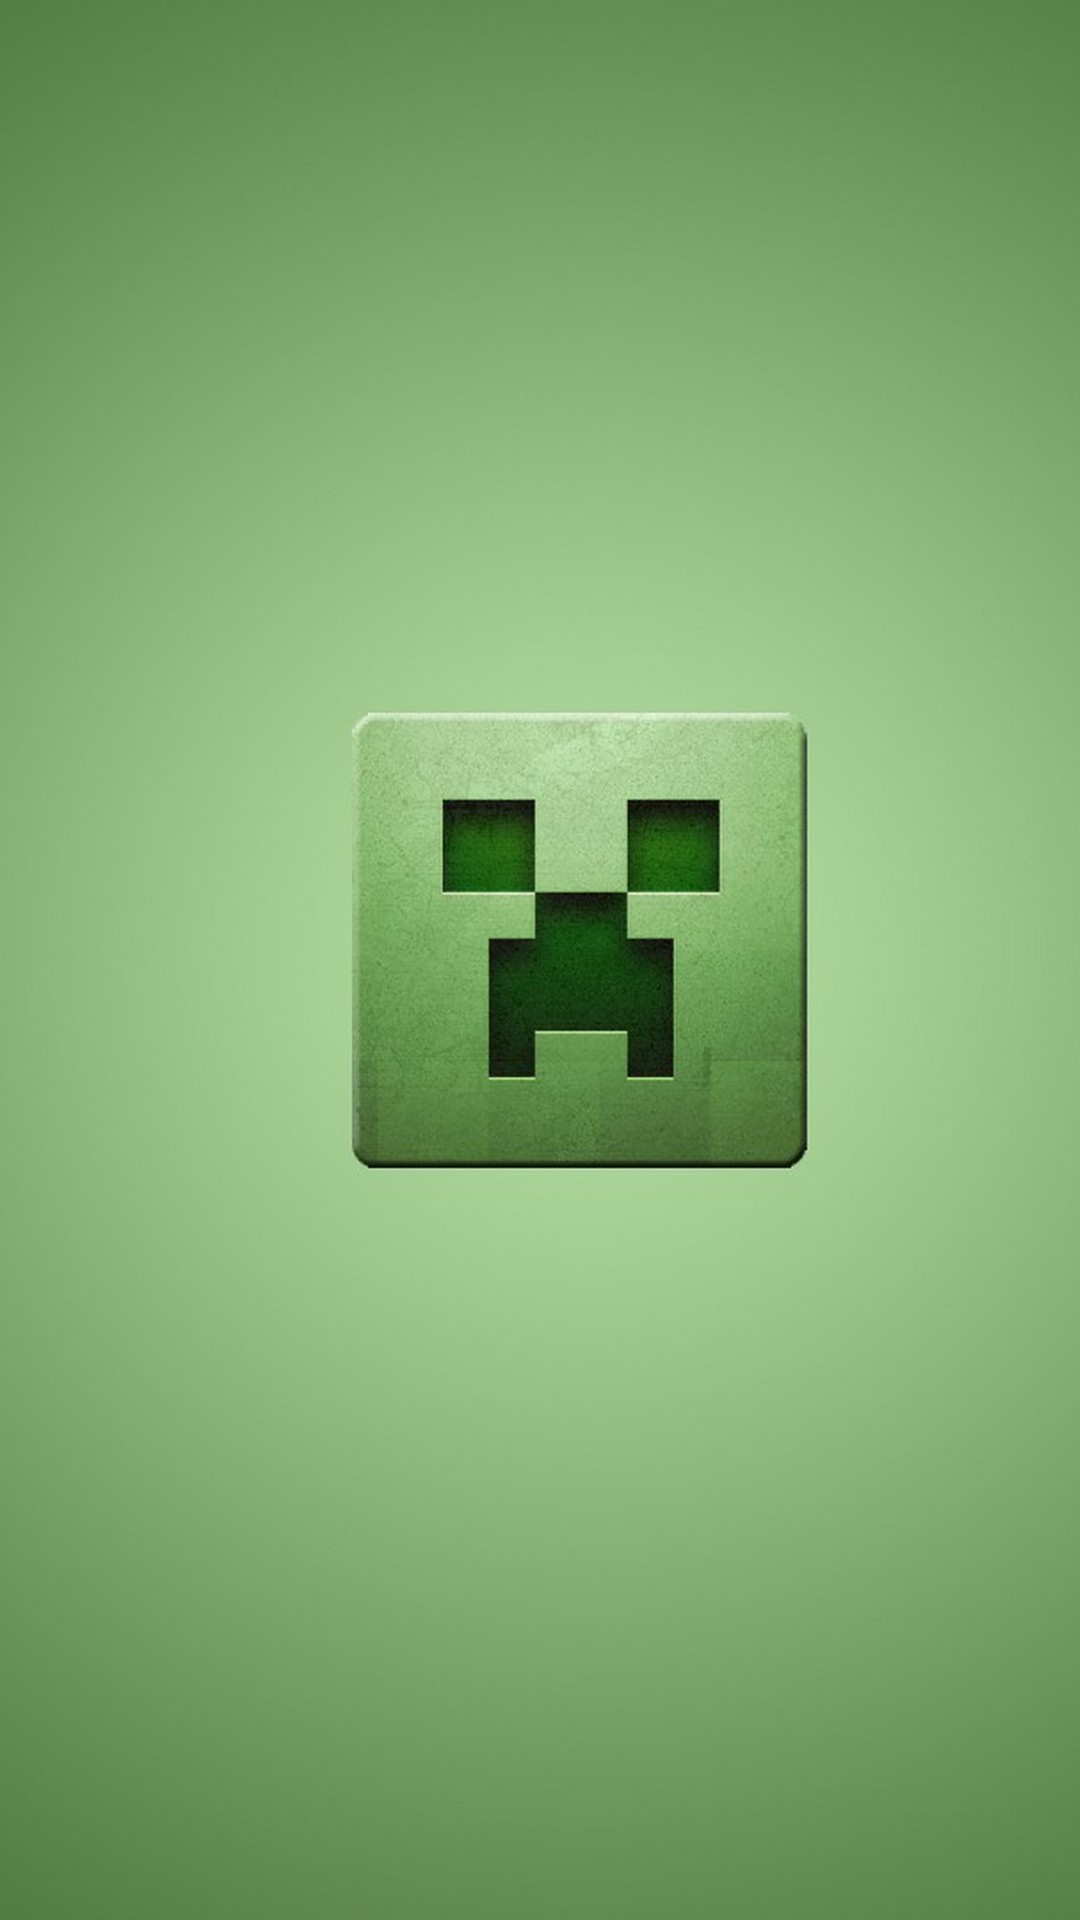 Cute Green Wallpaper For iPhone with image resolution 1080x1920 pixel. You can make this wallpaper for your iPhone 5, 6, 7, 8, X backgrounds, Mobile Screensaver, or iPad Lock Screen